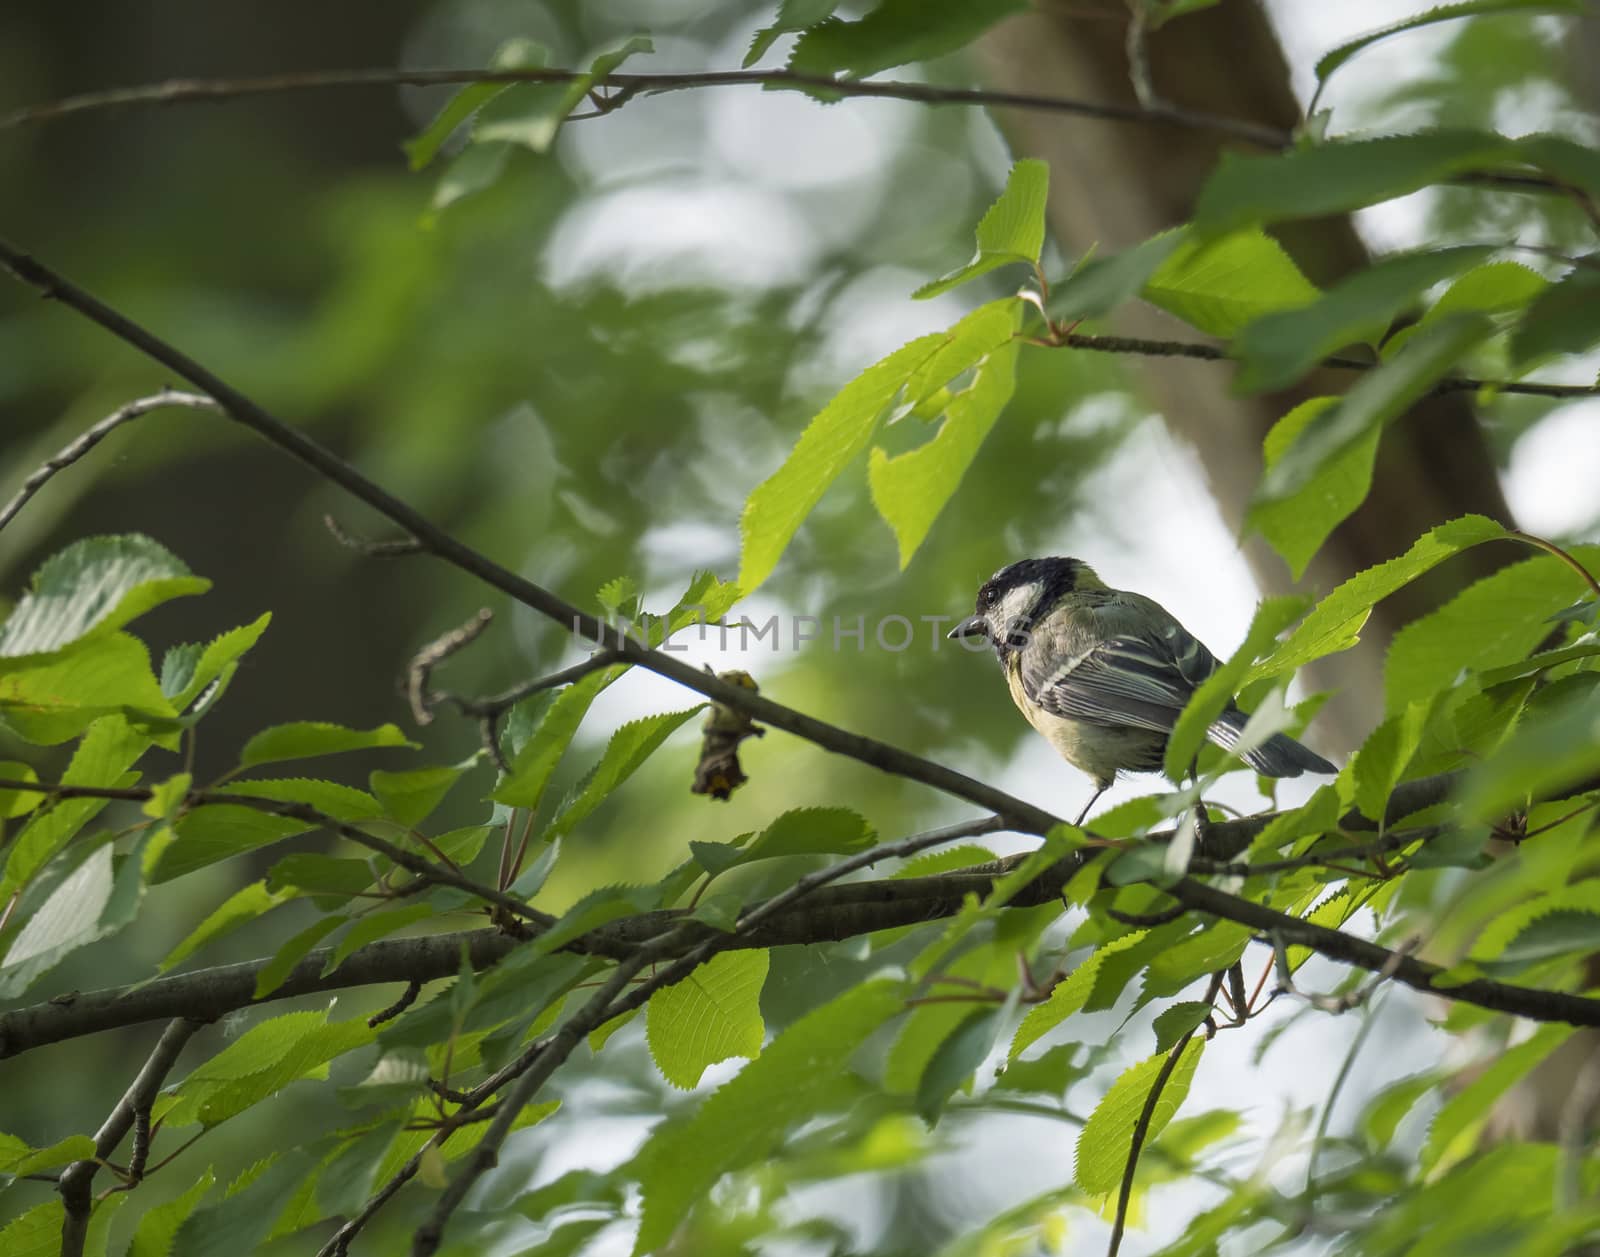 coal tit, Periparus ater sitting on the branch with spring green leaves . Wildlife scene from nature. Song bird in the natural habitat. by Henkeova